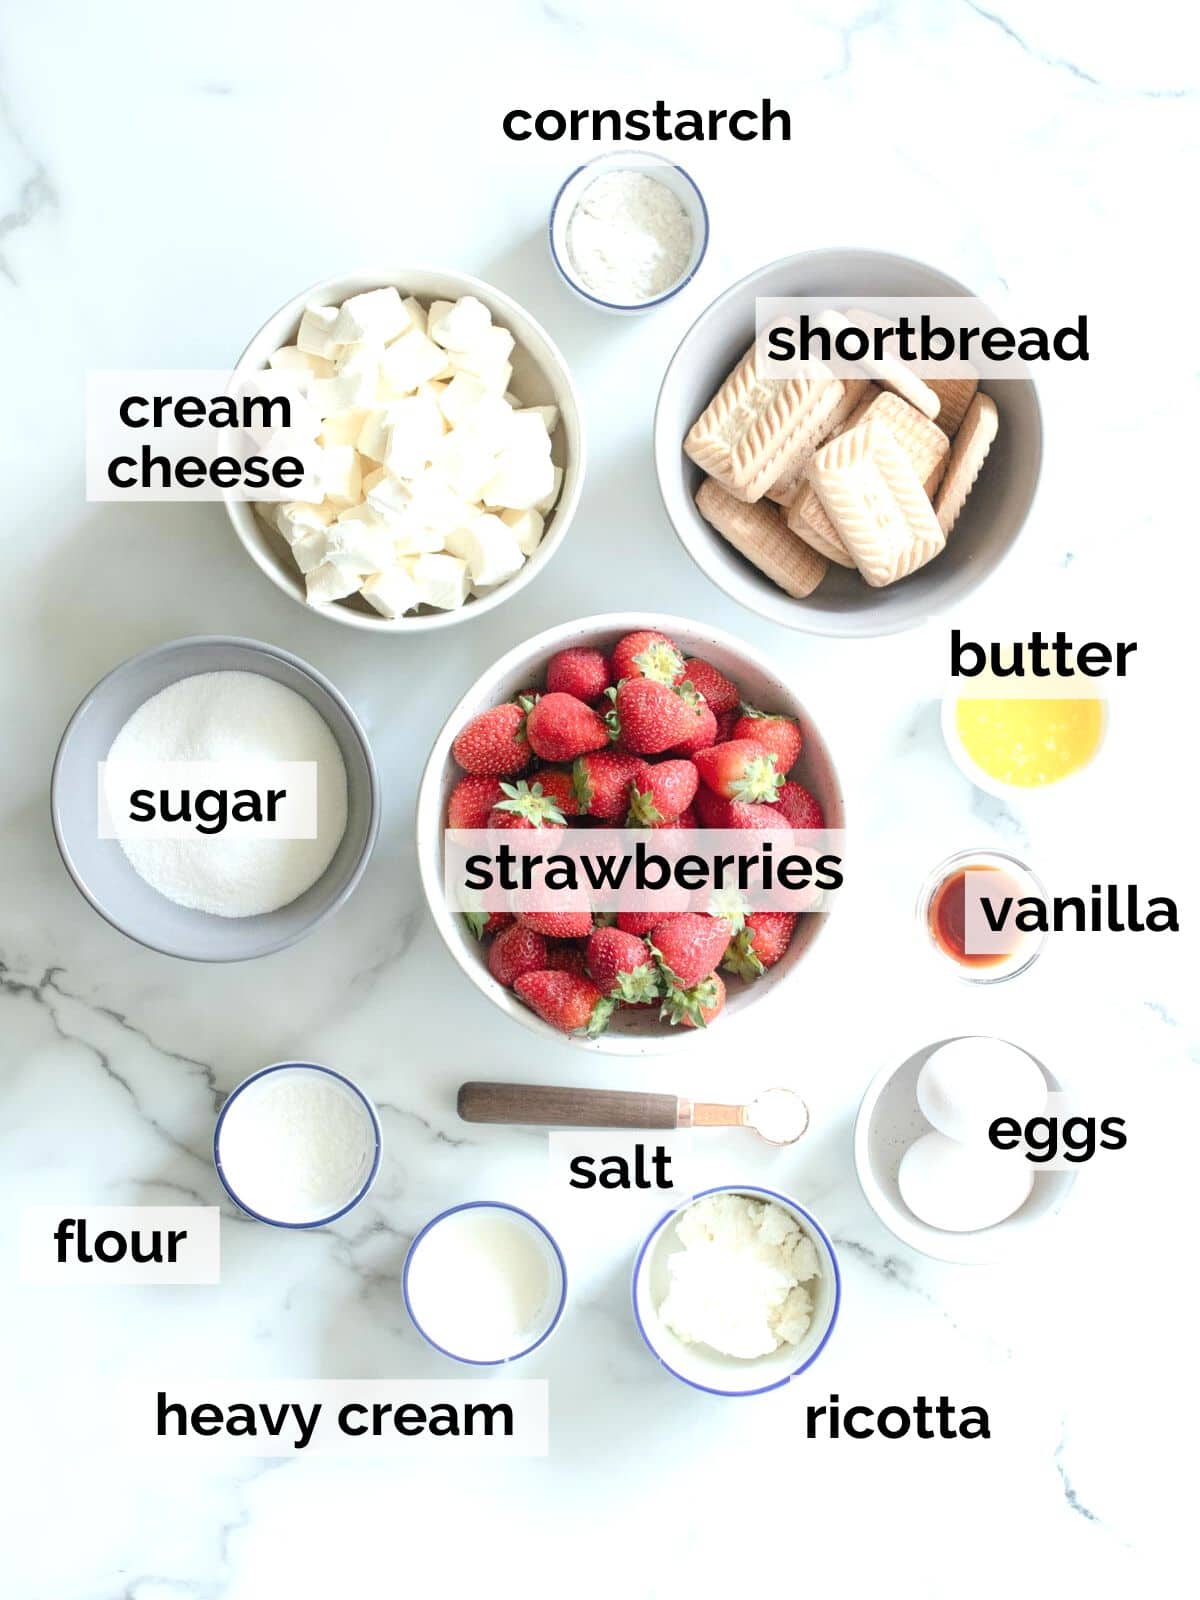 Ingredients for cheesecake bars with strawberries.